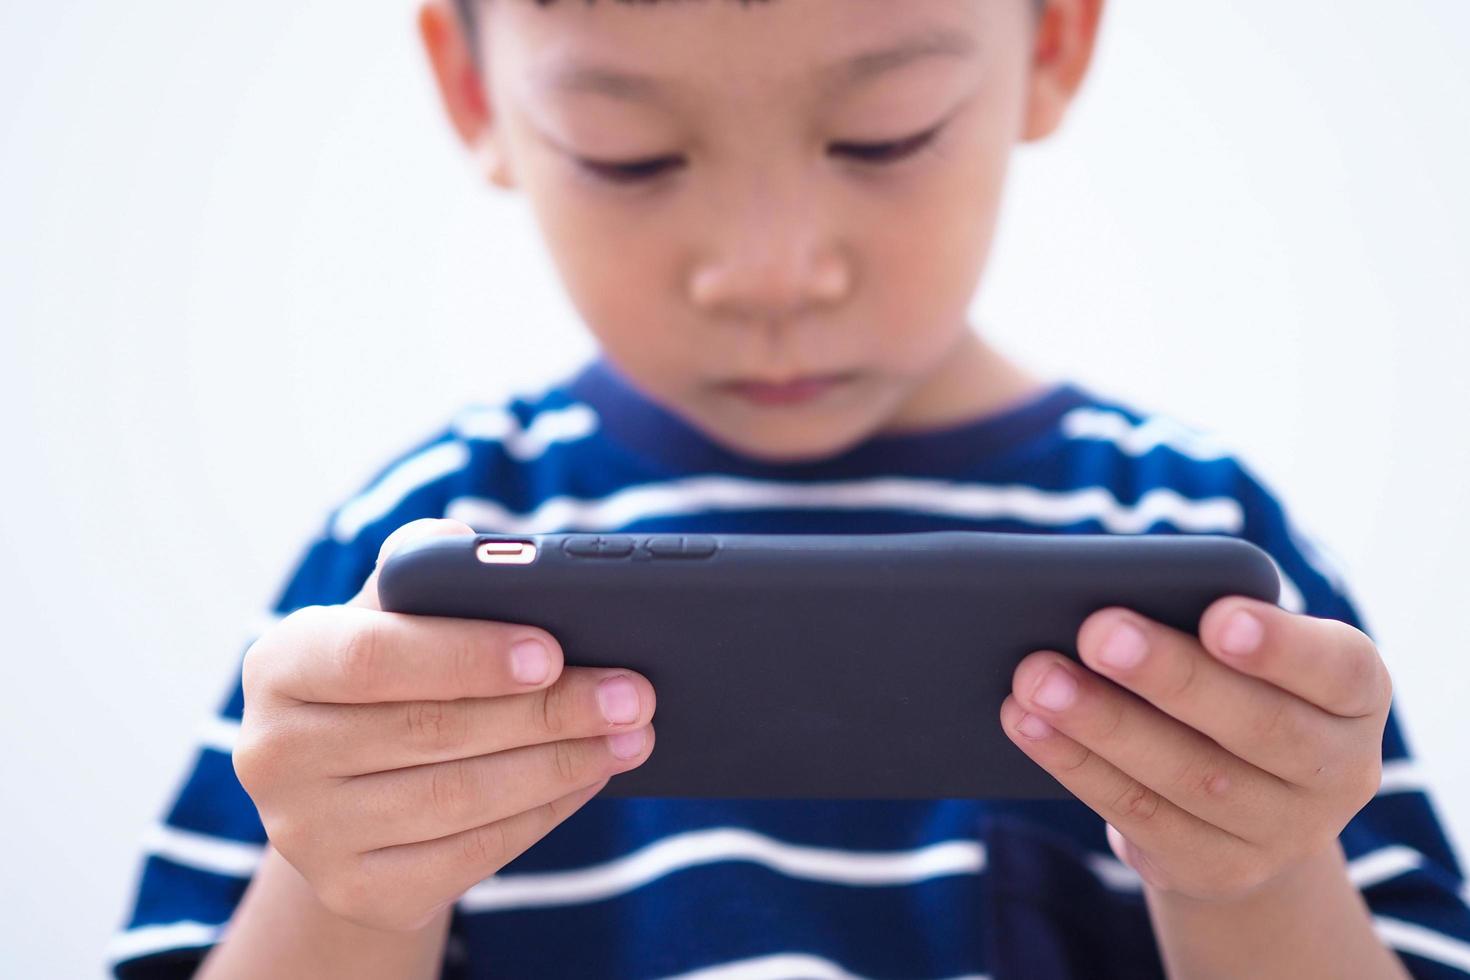 Asian children in the age of social networks that focus on phones or tablets. photo